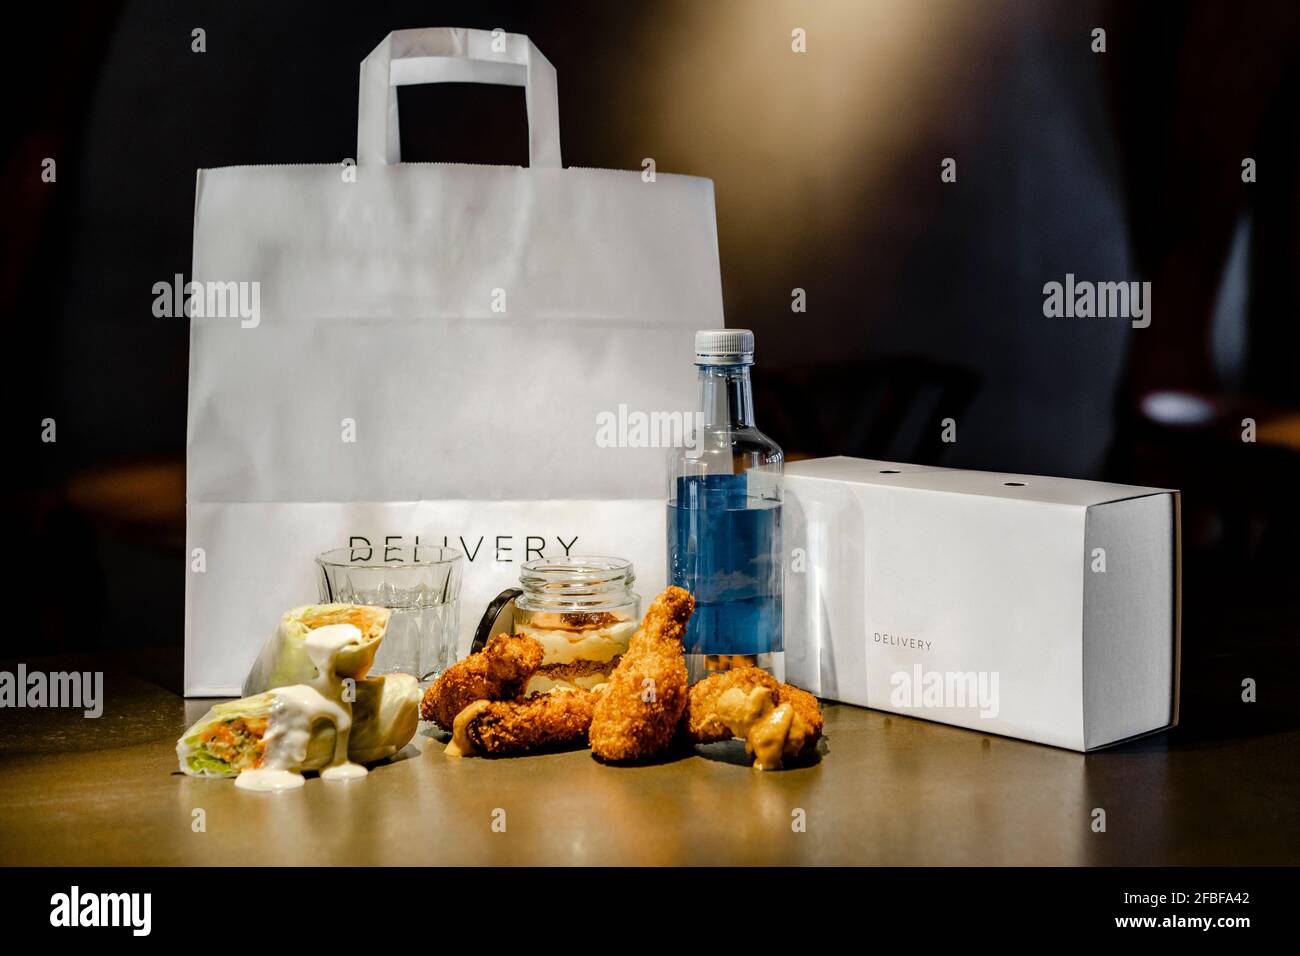 Chicken wings and wrap sandwich by delivery bag and box on kitchen island Stock Photo